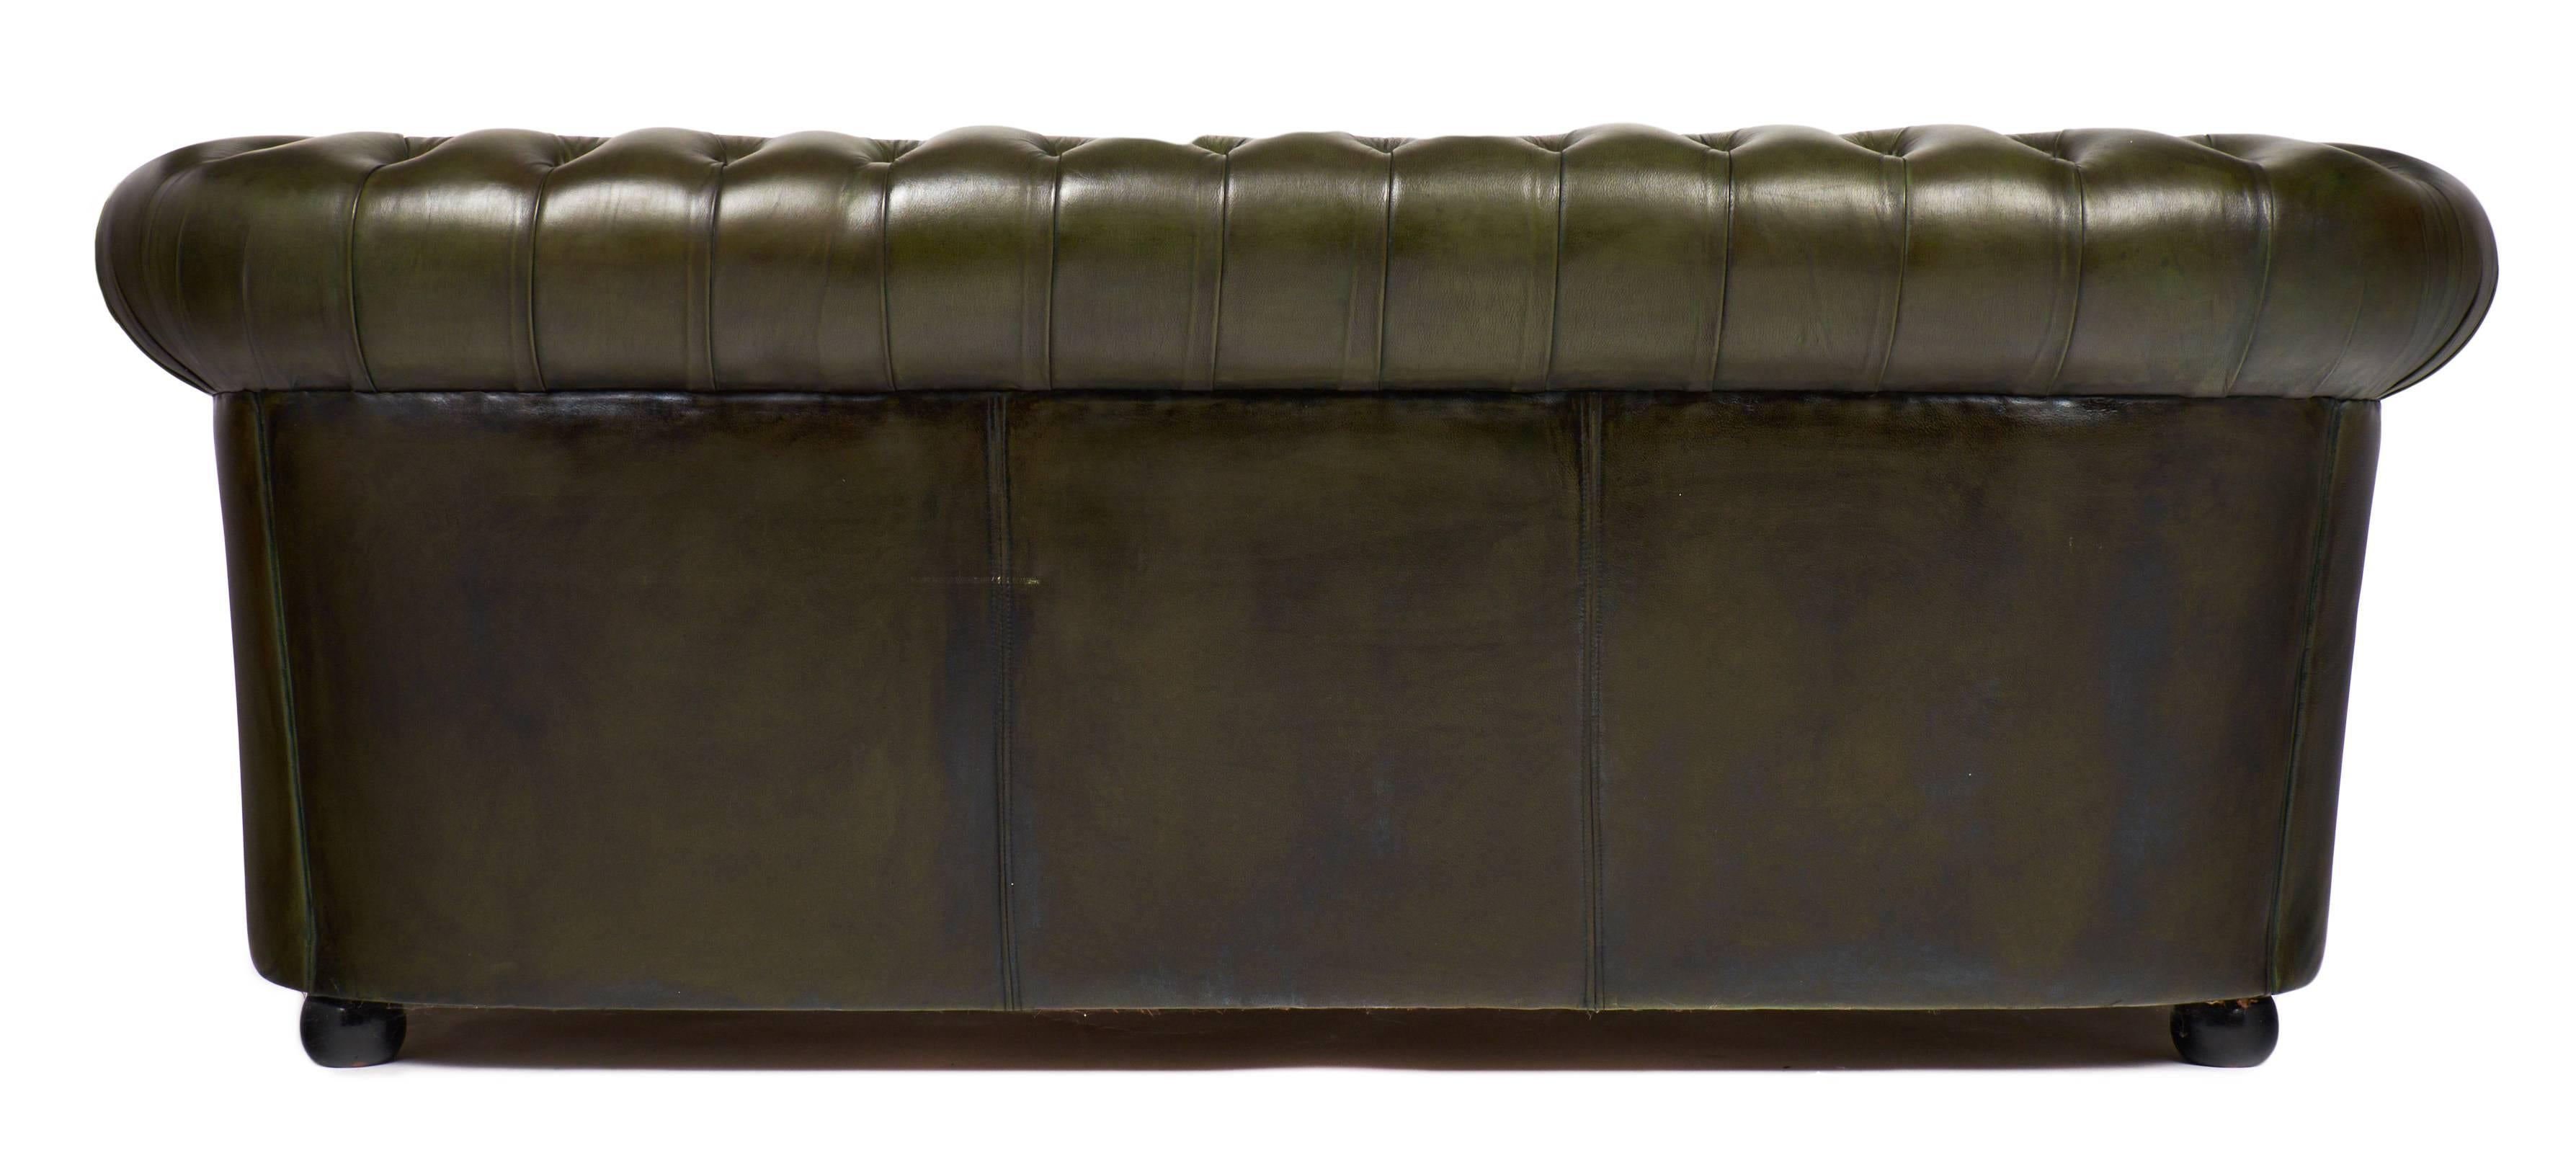 Leather English Vintage Green or Bronze Chesterfield Sofa